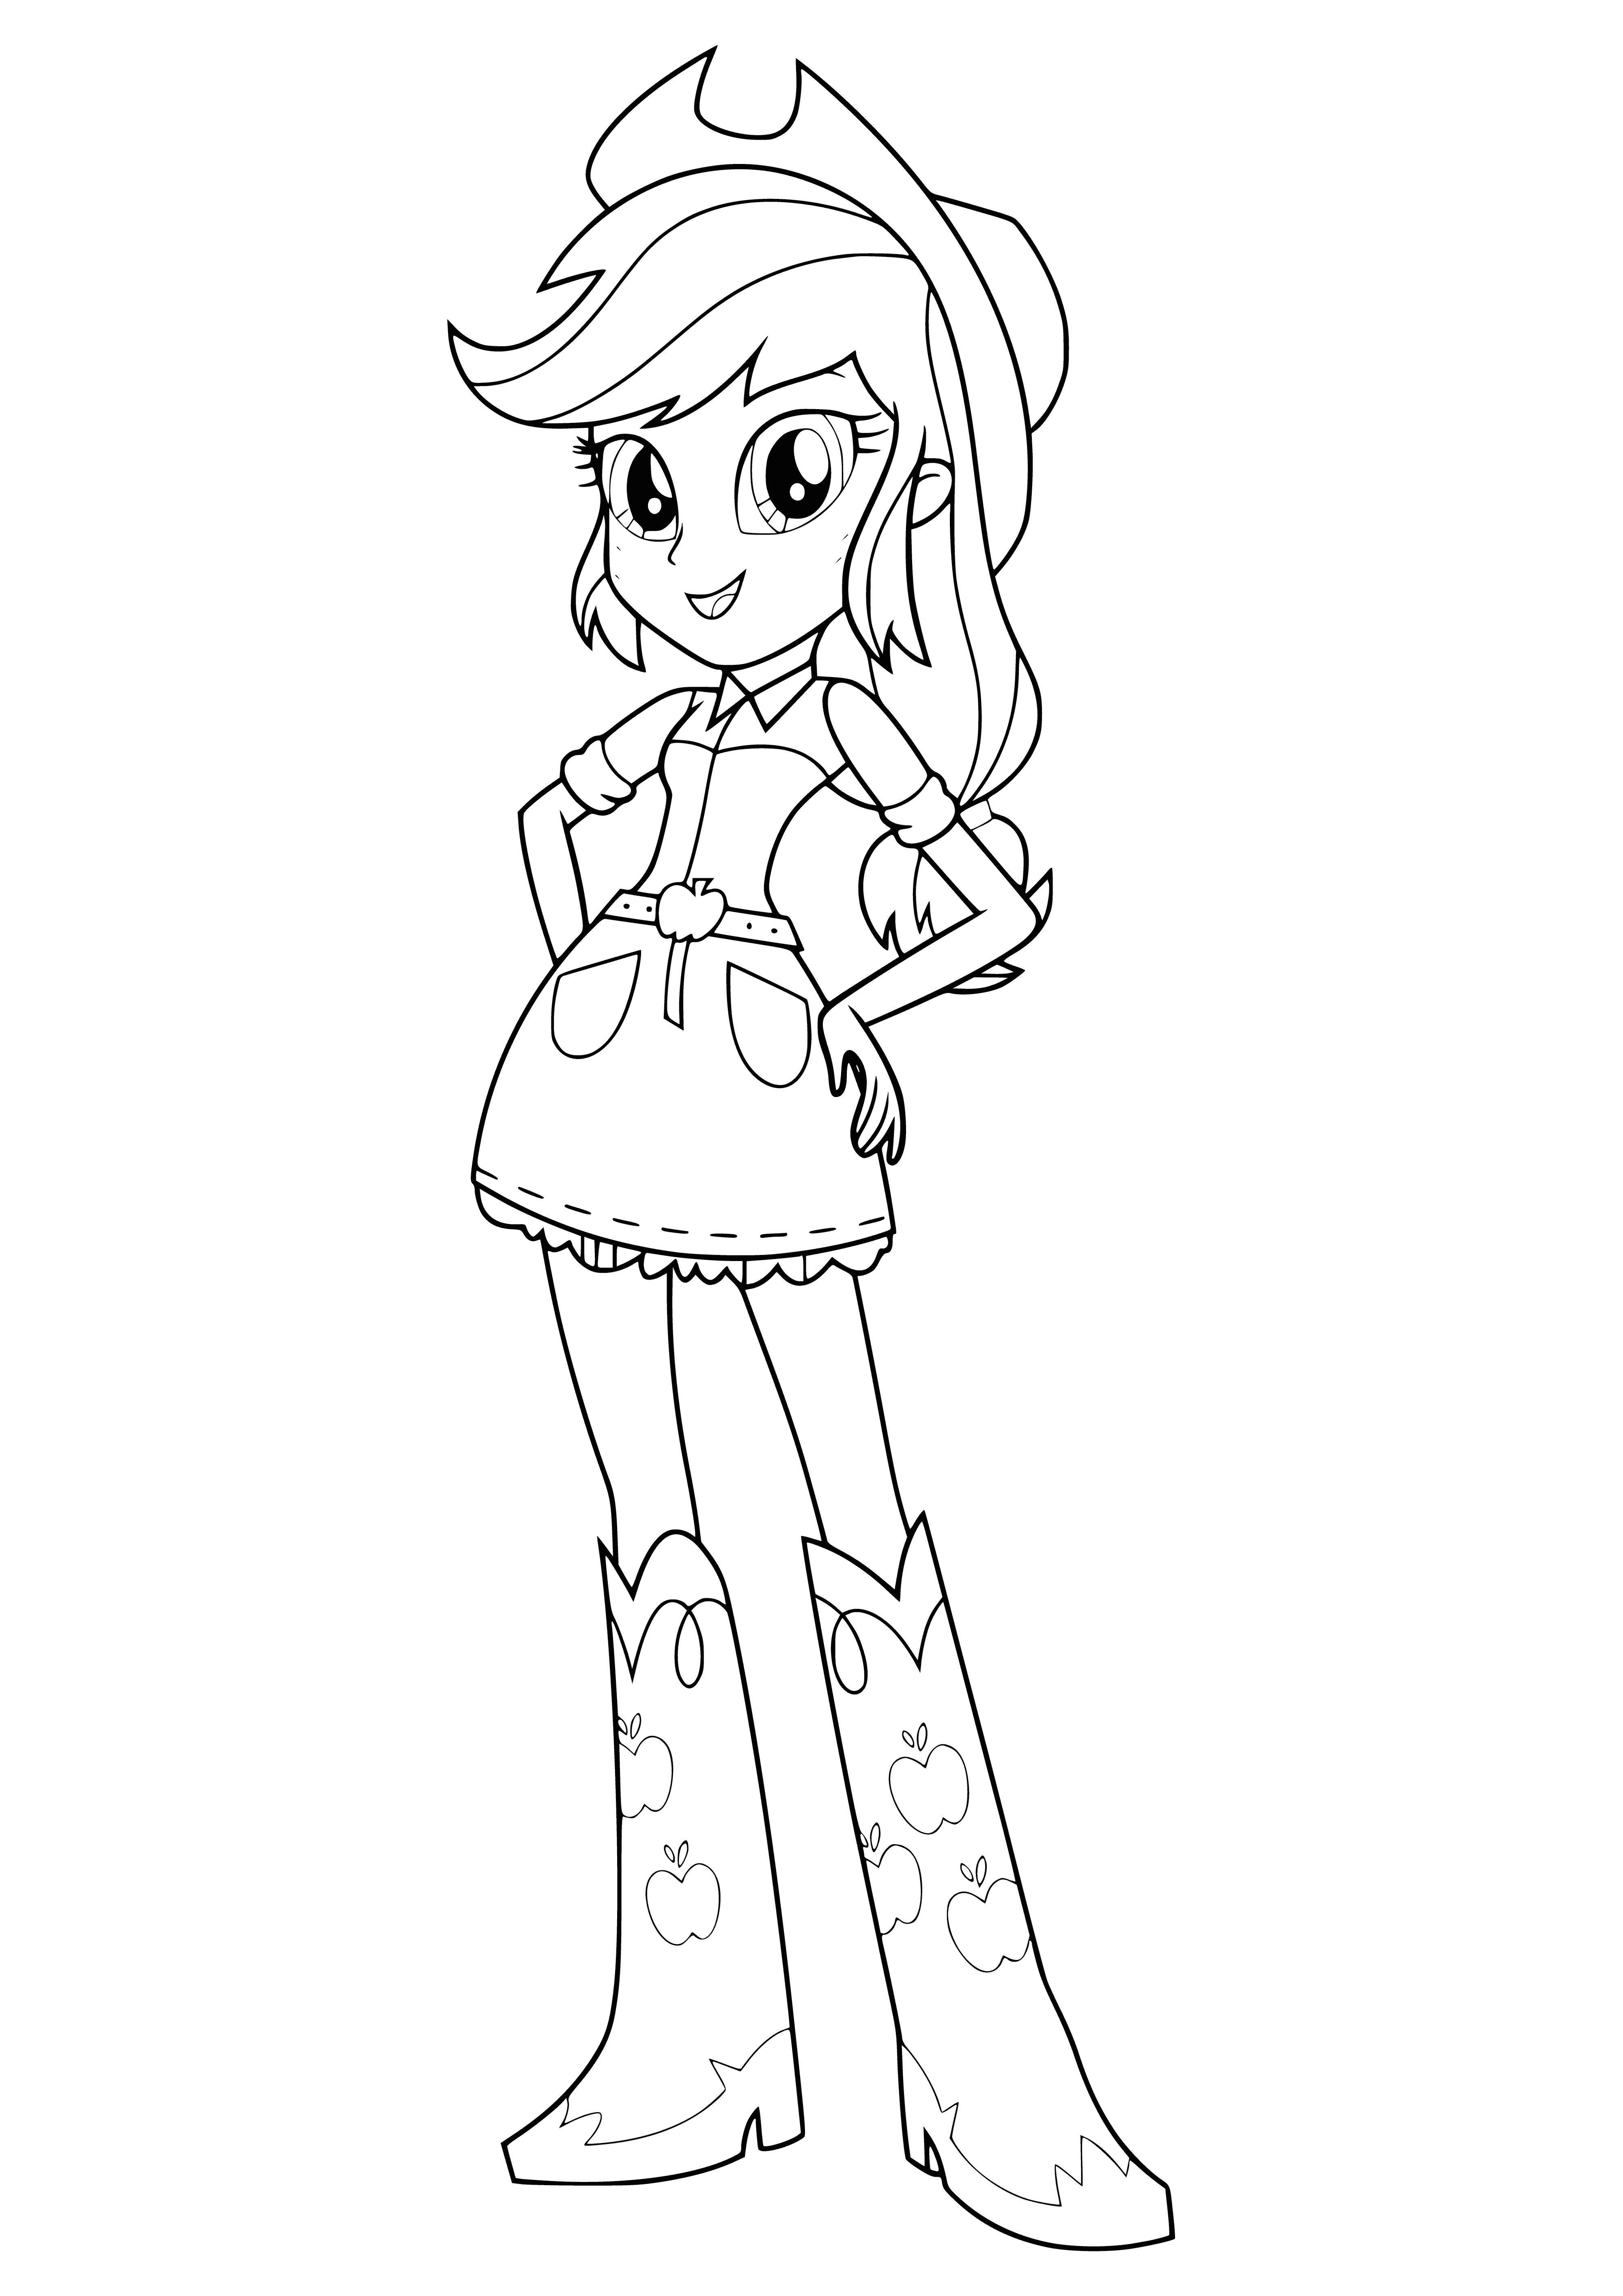 coloring page: Applejack is a girl with long, straight orange hair, a cowboy hat, plaid skirt, vest, boots & backpack.